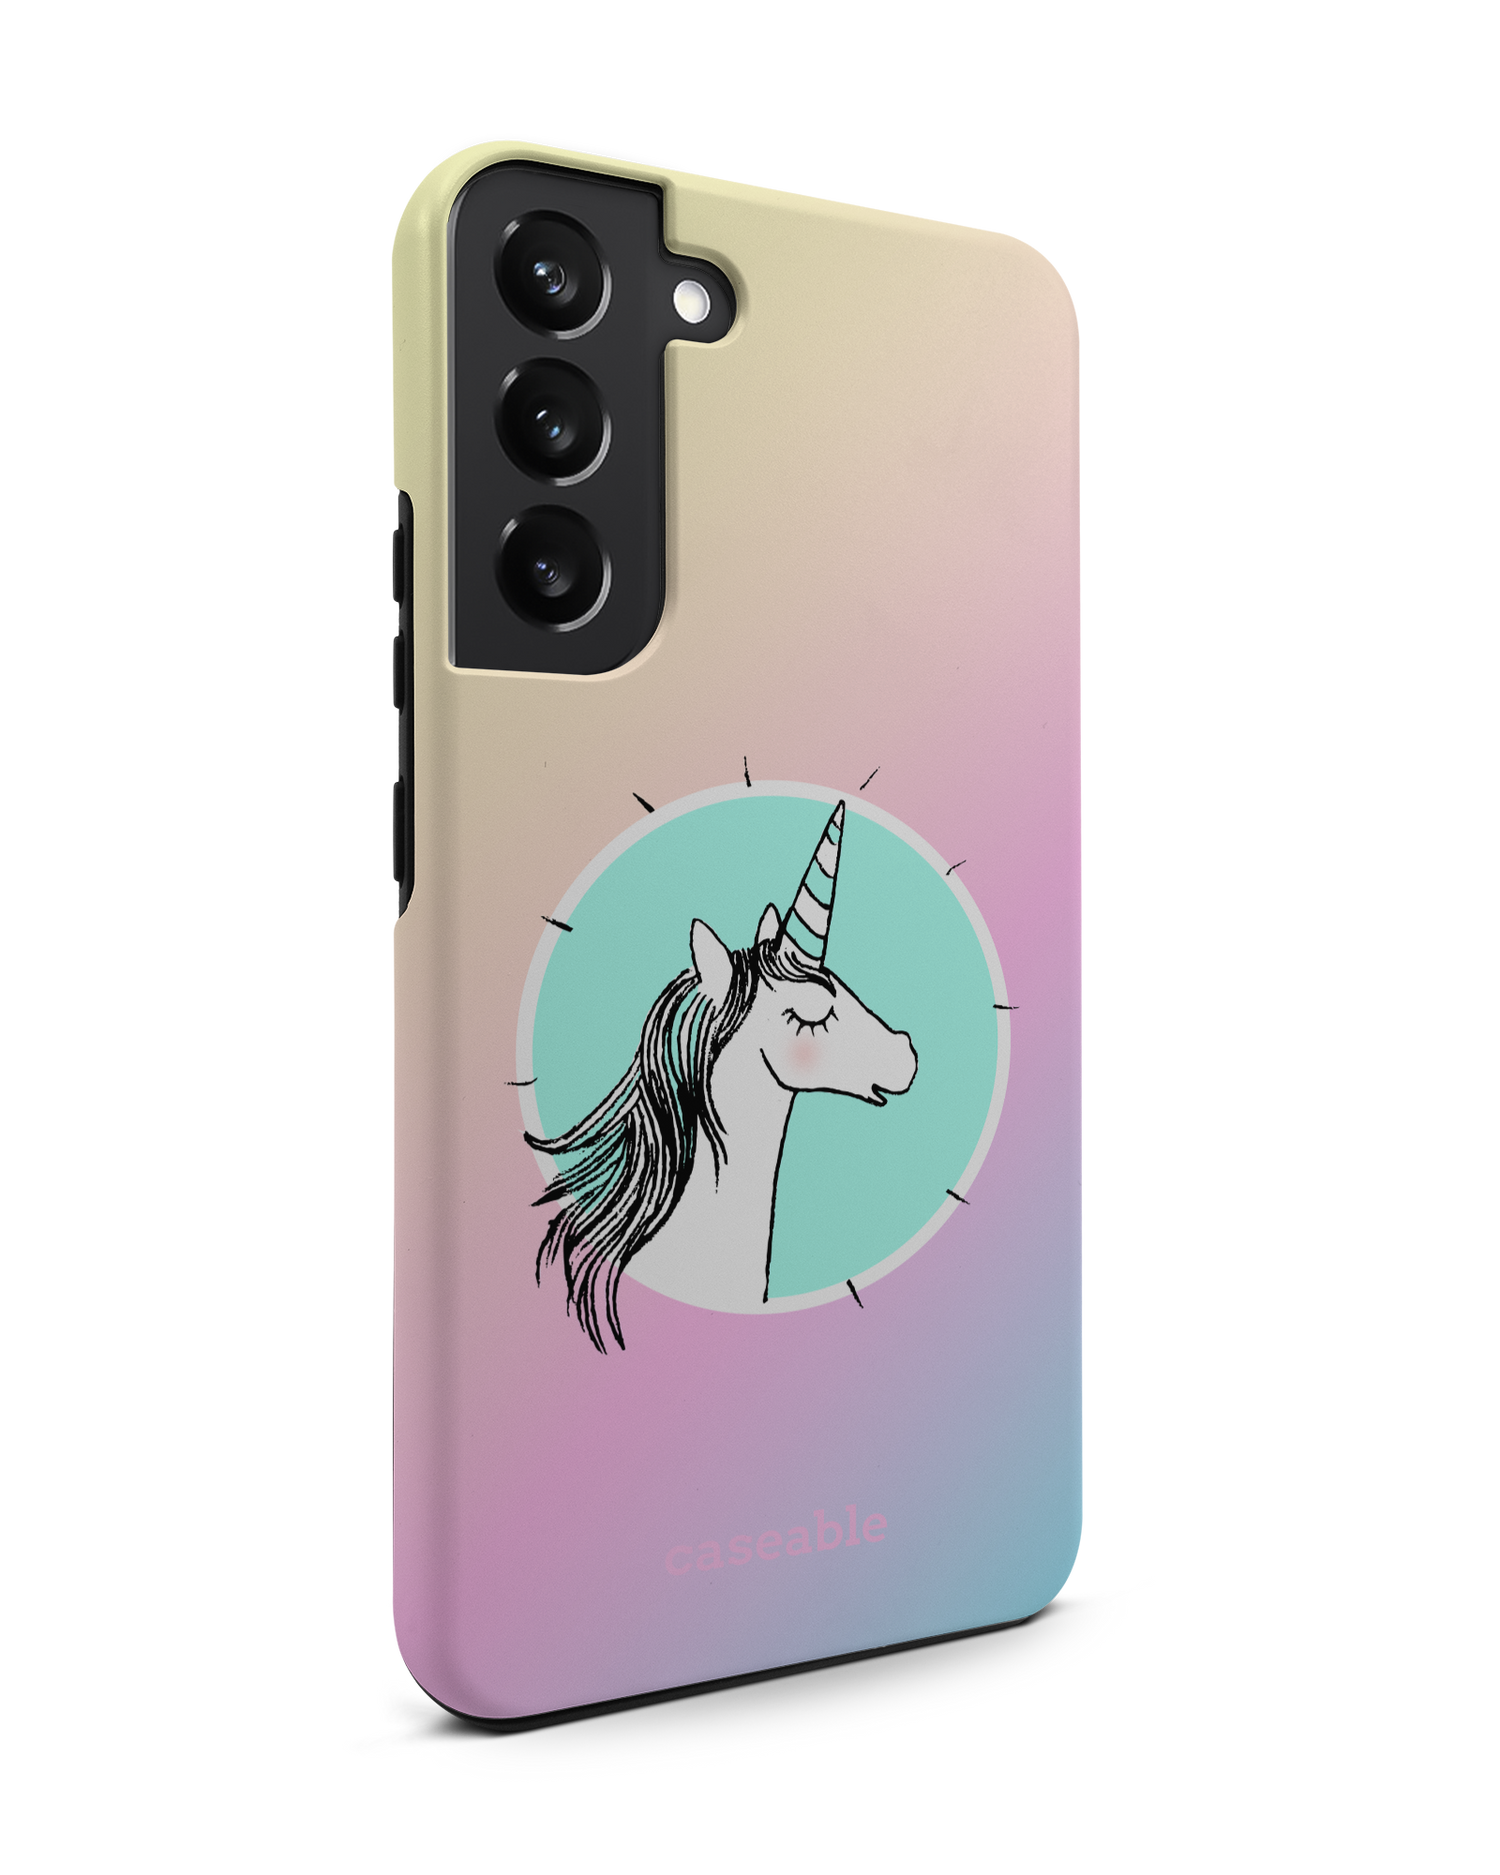 Happiness Unicorn Premium Phone Case Samsung Galaxy S22 Plus 5G: View from the left side